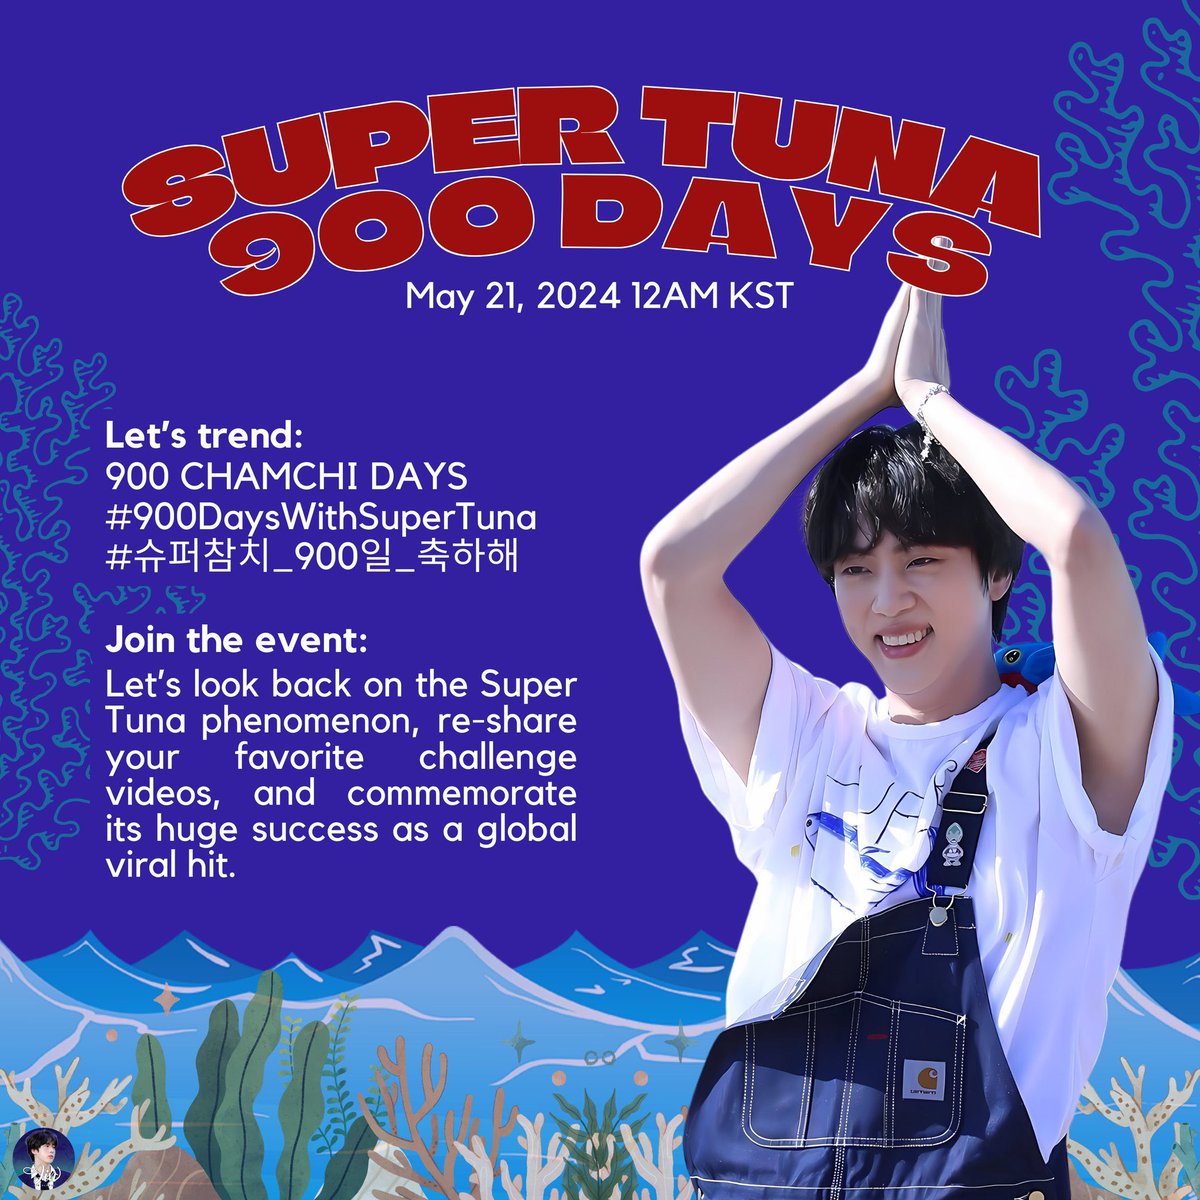 Join us on May 21, 2024 as we celebrate 900 days since Super Tuna was released 🐟 Trend: 900/CHAMCHI/DAYS #/900DaysWithSuperTuna #/슈퍼참치_900일_축하해 Event: Let’s look back on the Super Tuna phenomenon, re-share your favorite challenge videos, and commemorate its huge